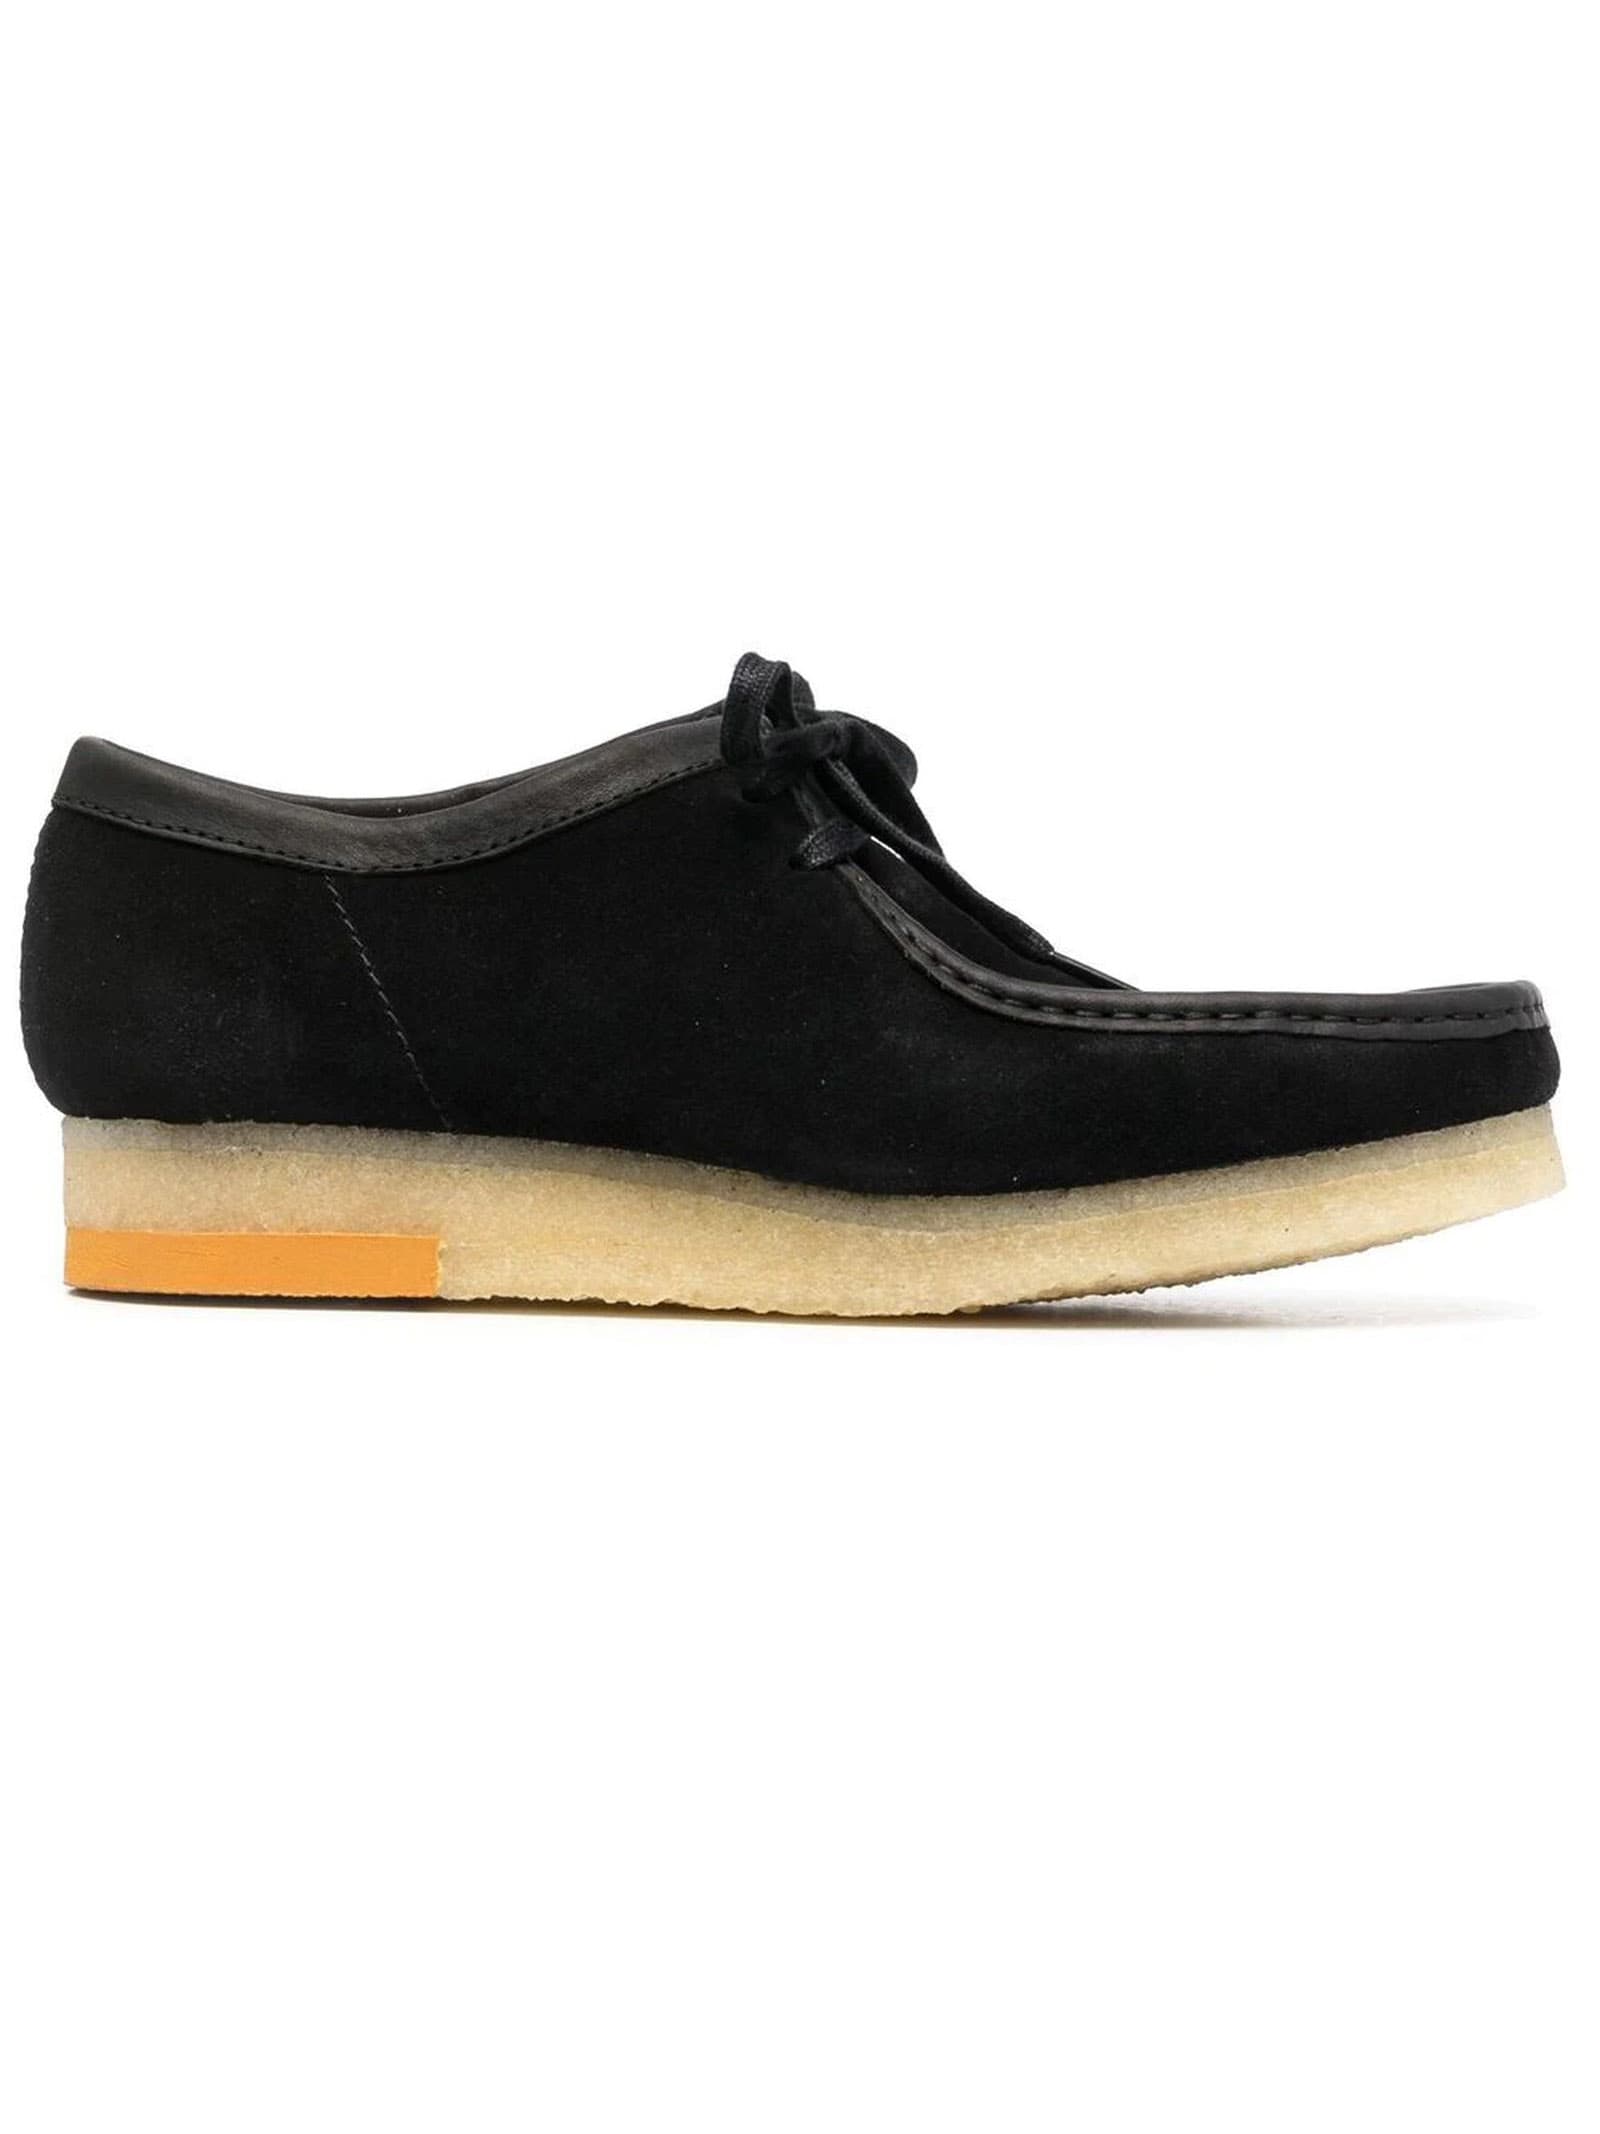 Clarks Black Suede Wallabee Lace-up Shoes